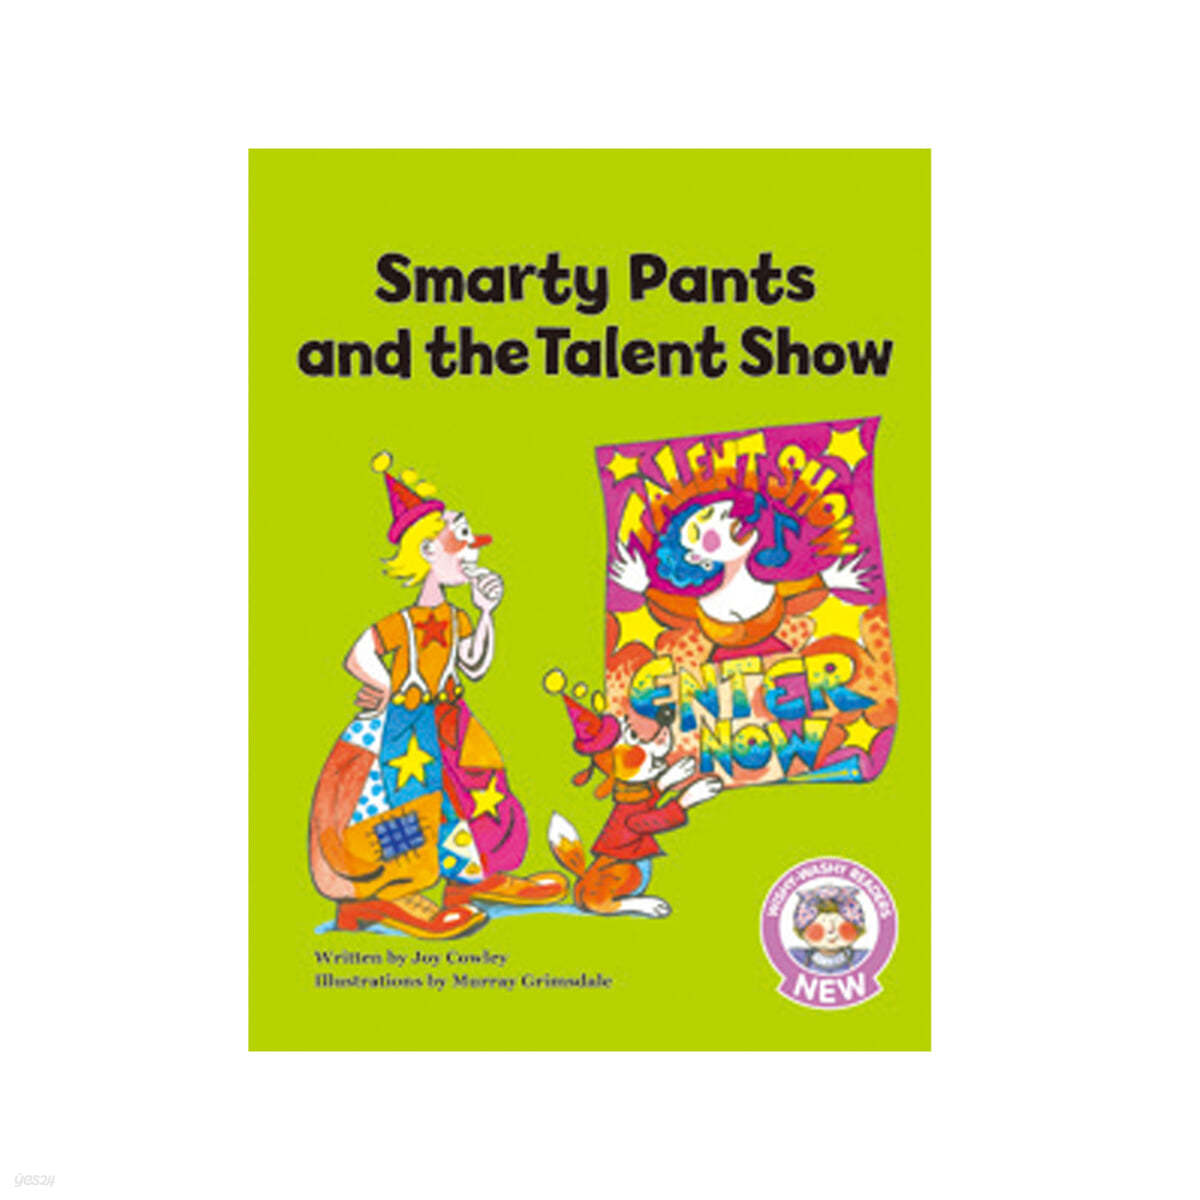 Smarty Pants and the Talent Show